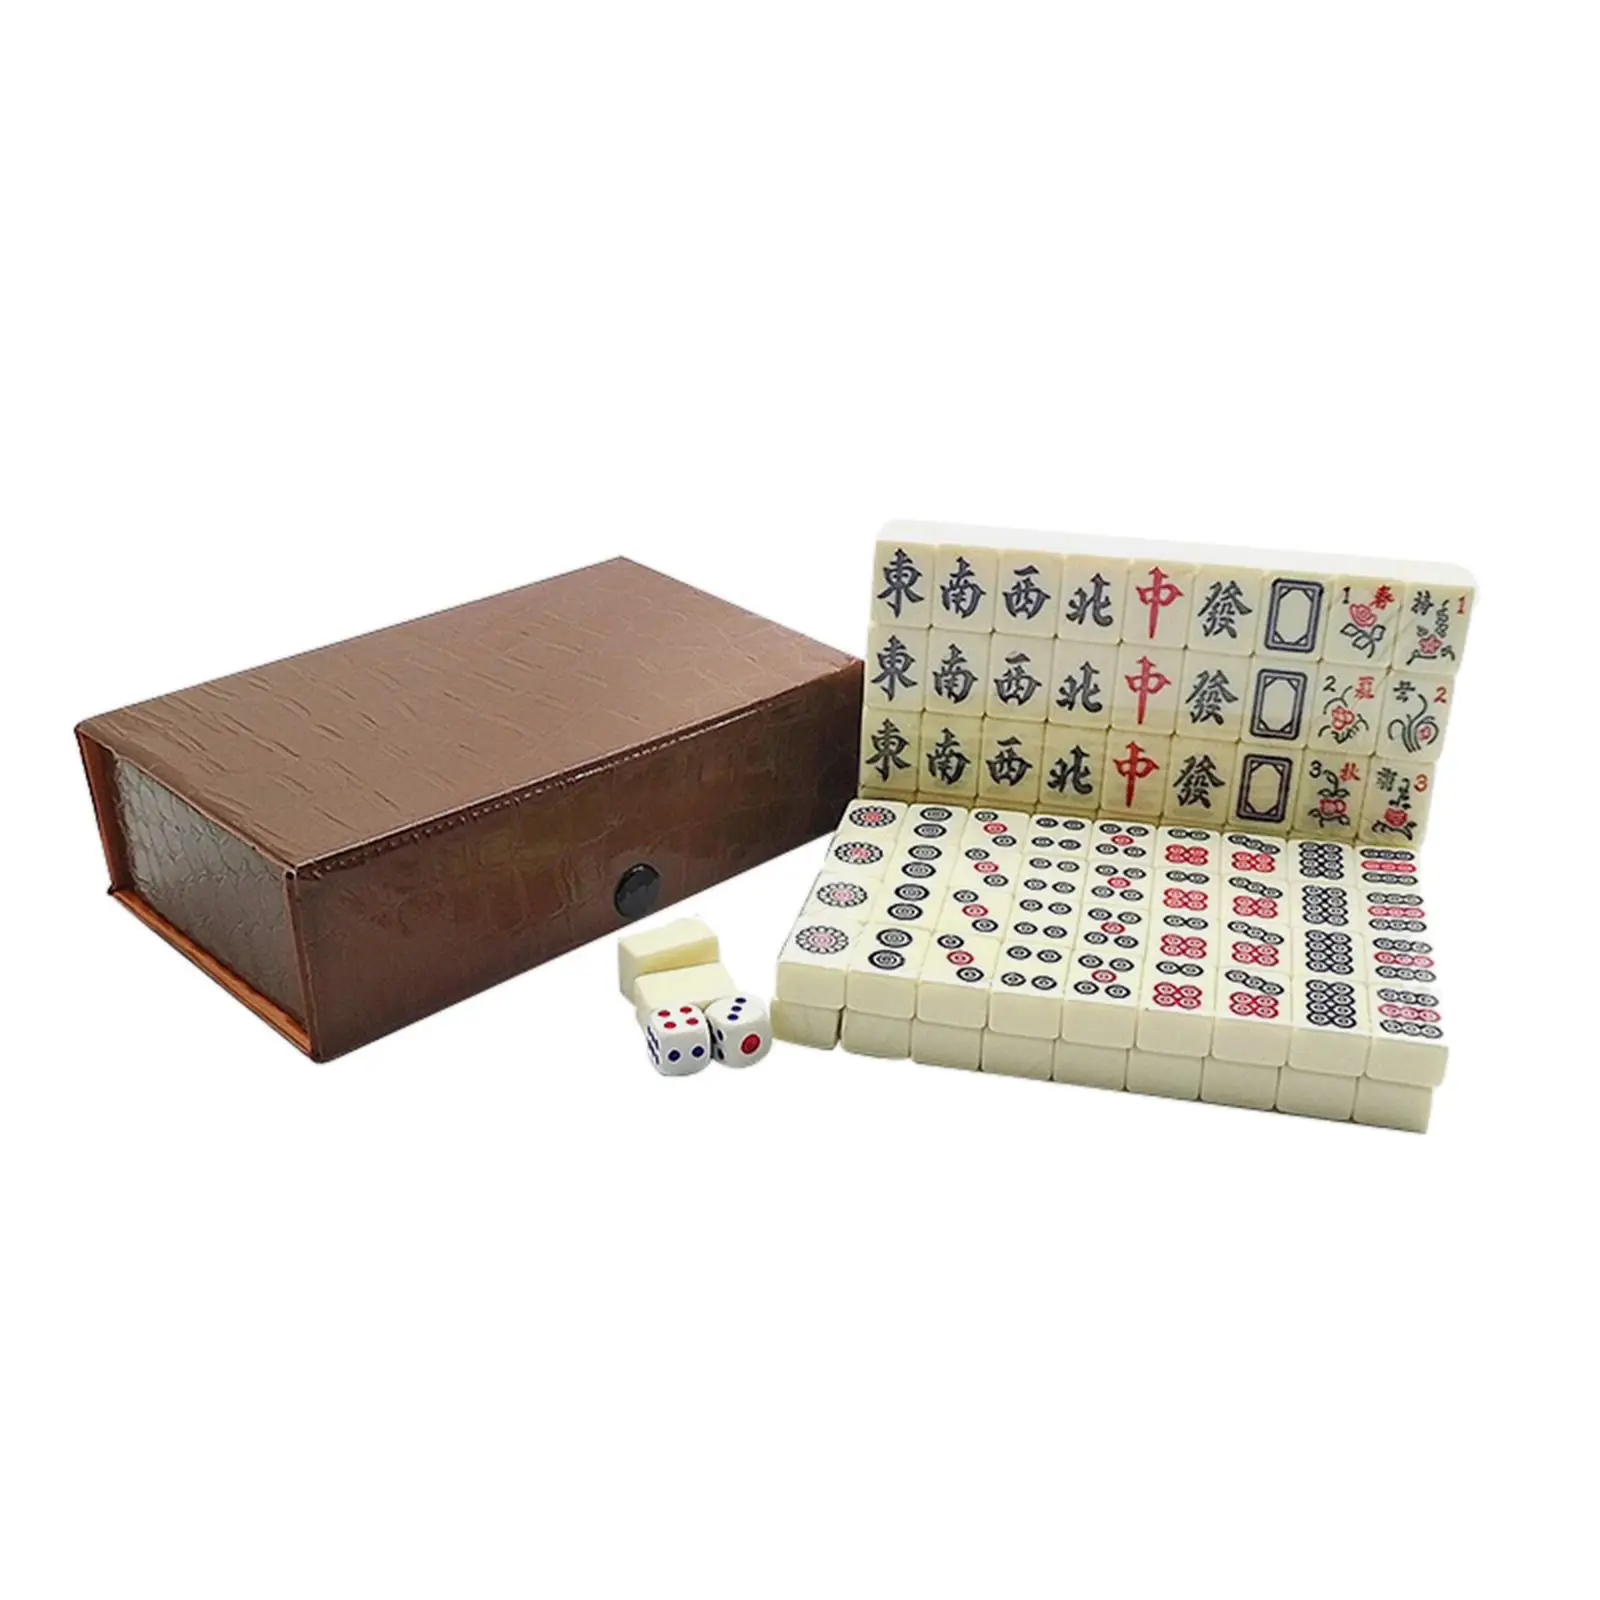 Antique Chinese Mahjong Game Set 144 Sheets with Storage Box Travel Mahjong Set for Family Leisure Travel Adults